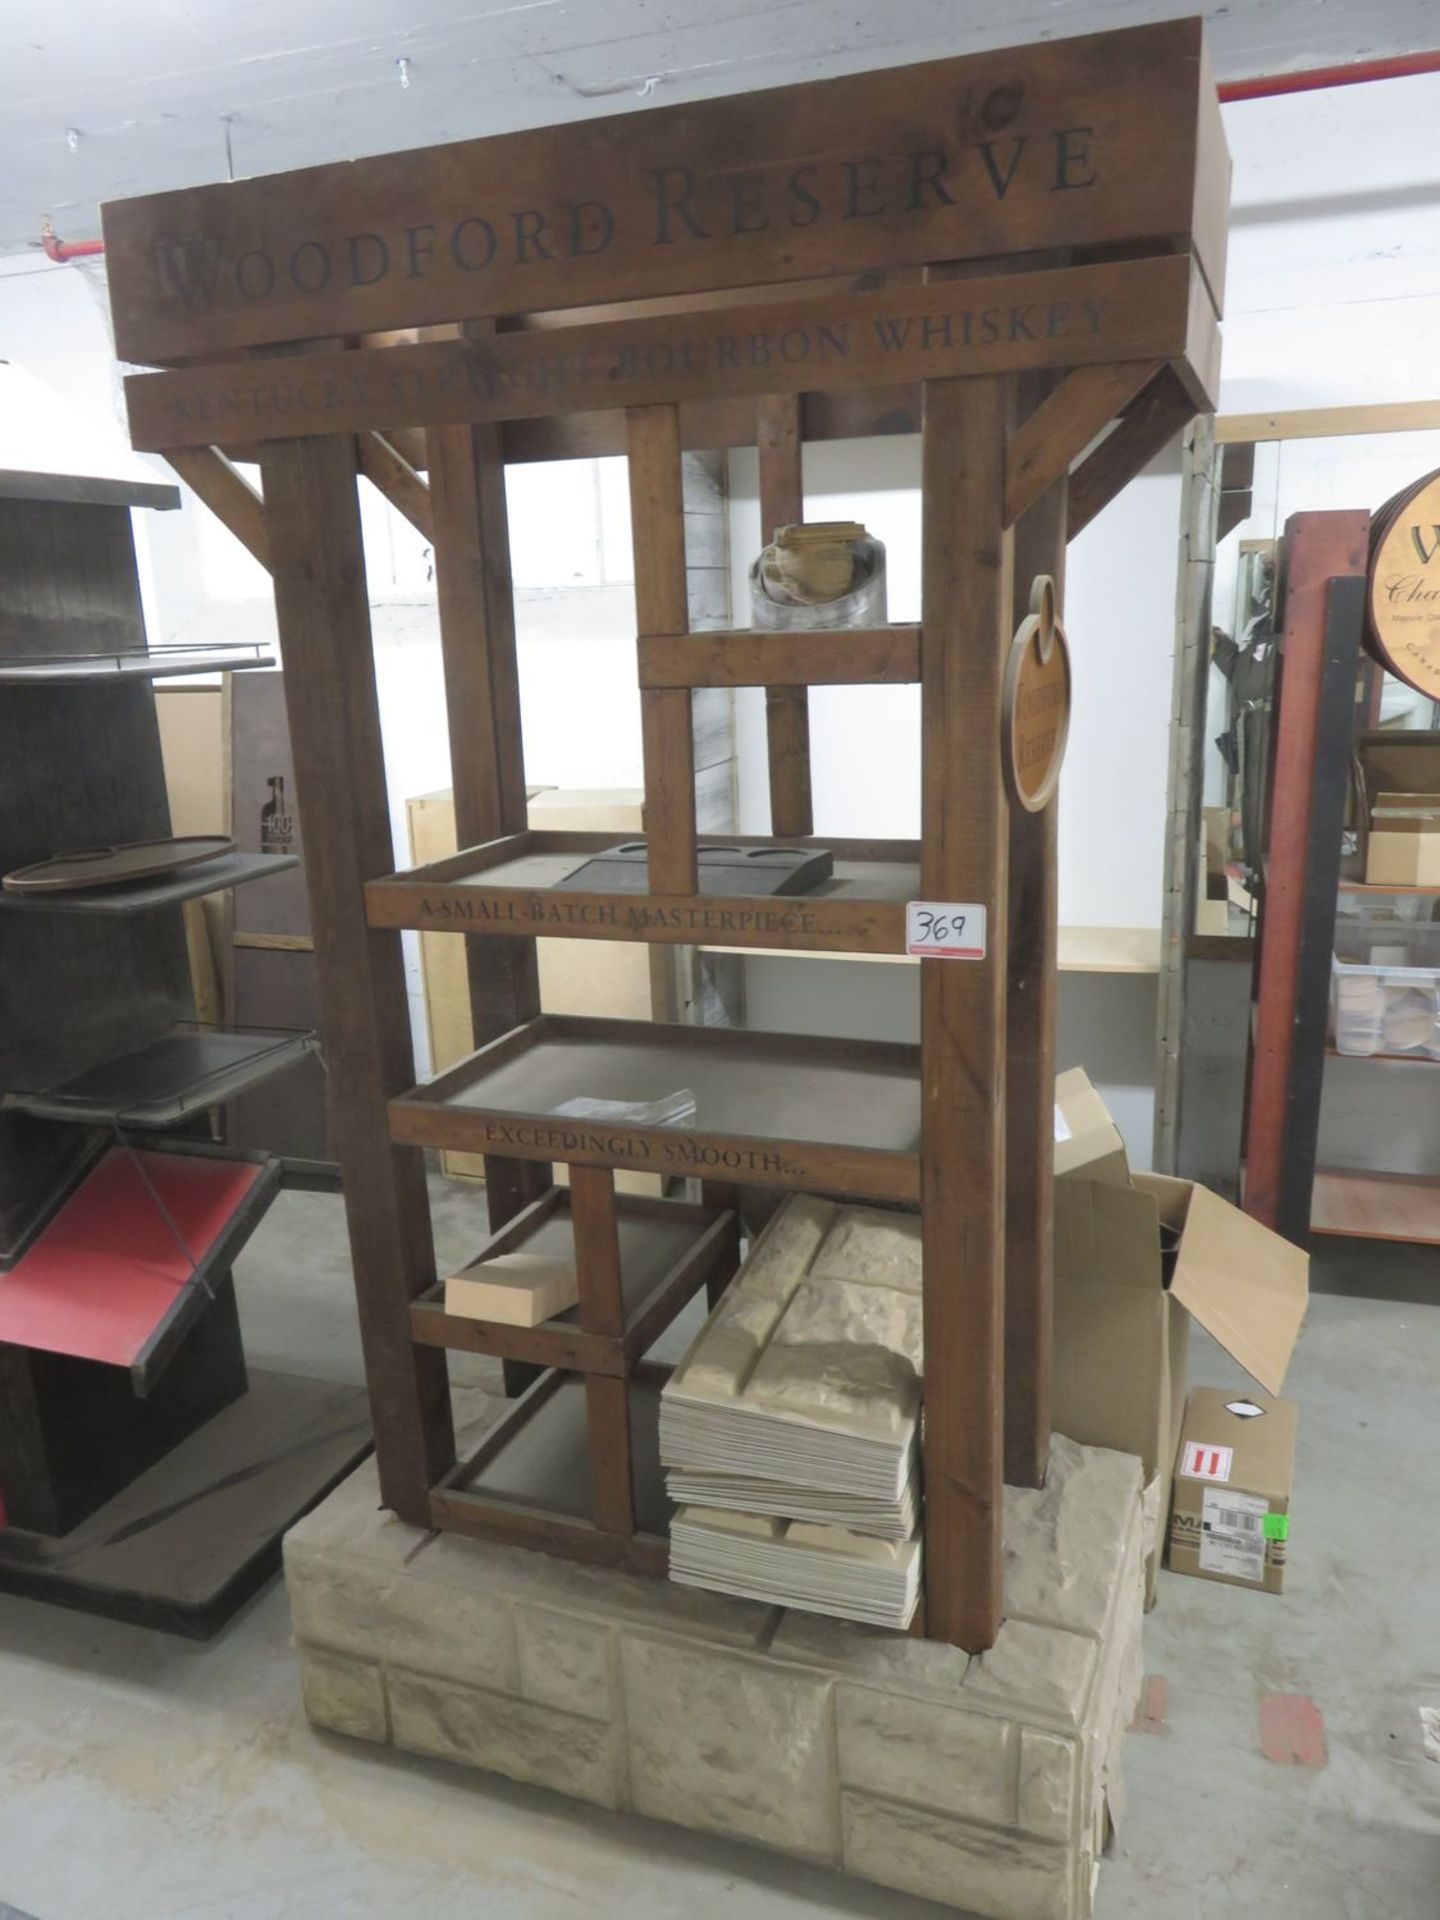 WOODFORD RESERVE WOOD WHISKY DISPLAY SHELVING UNIT